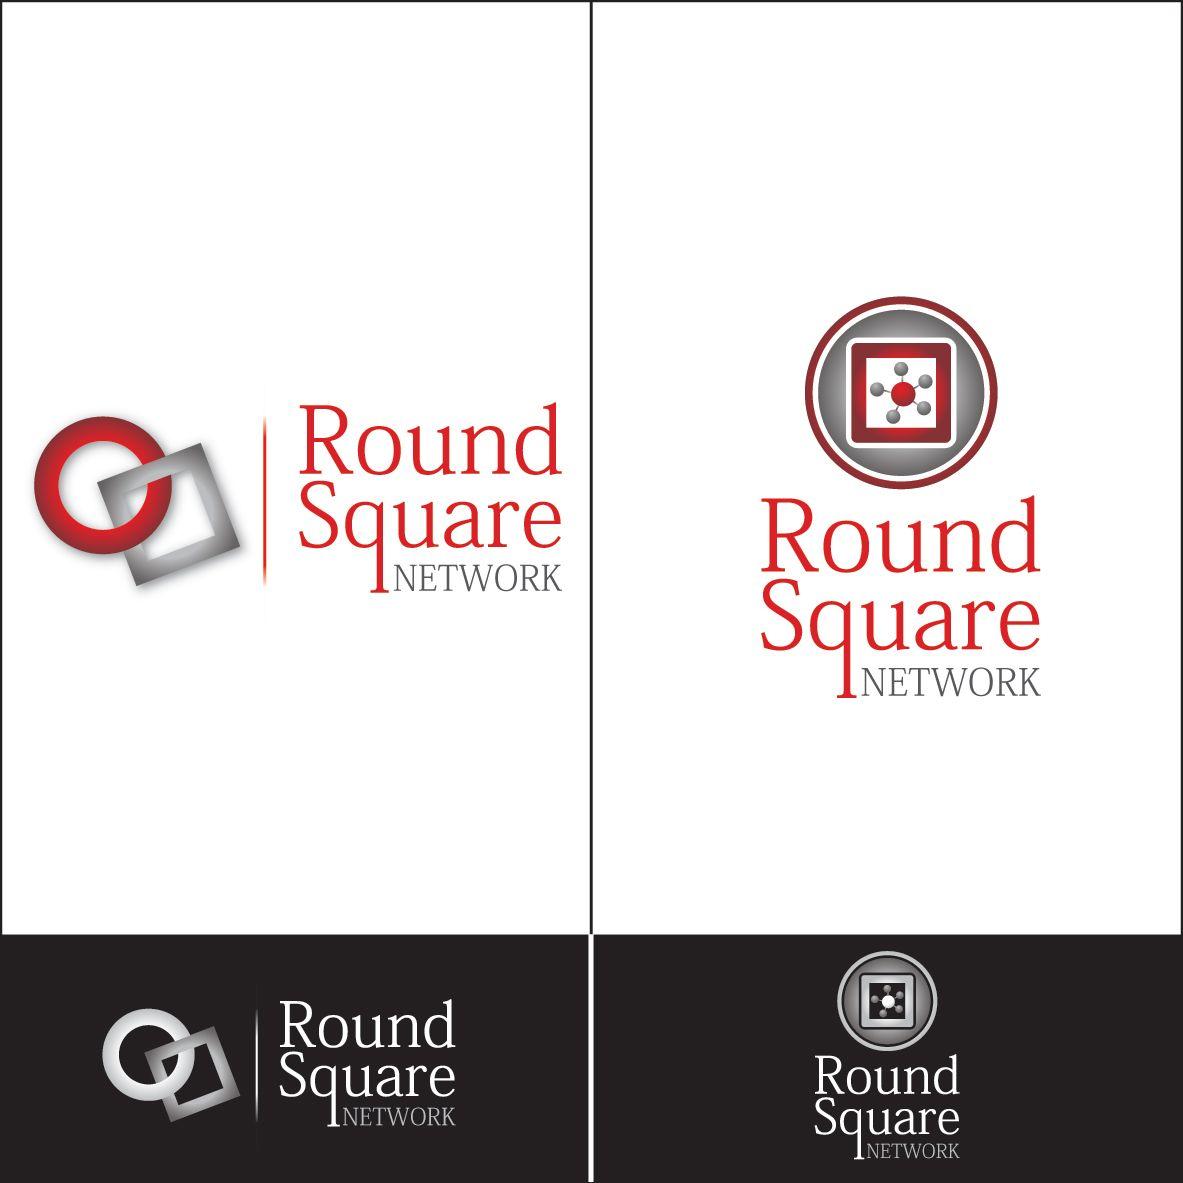 Round Square Logo - Bold, Playful, Community Logo Design for Round Square Network by ...